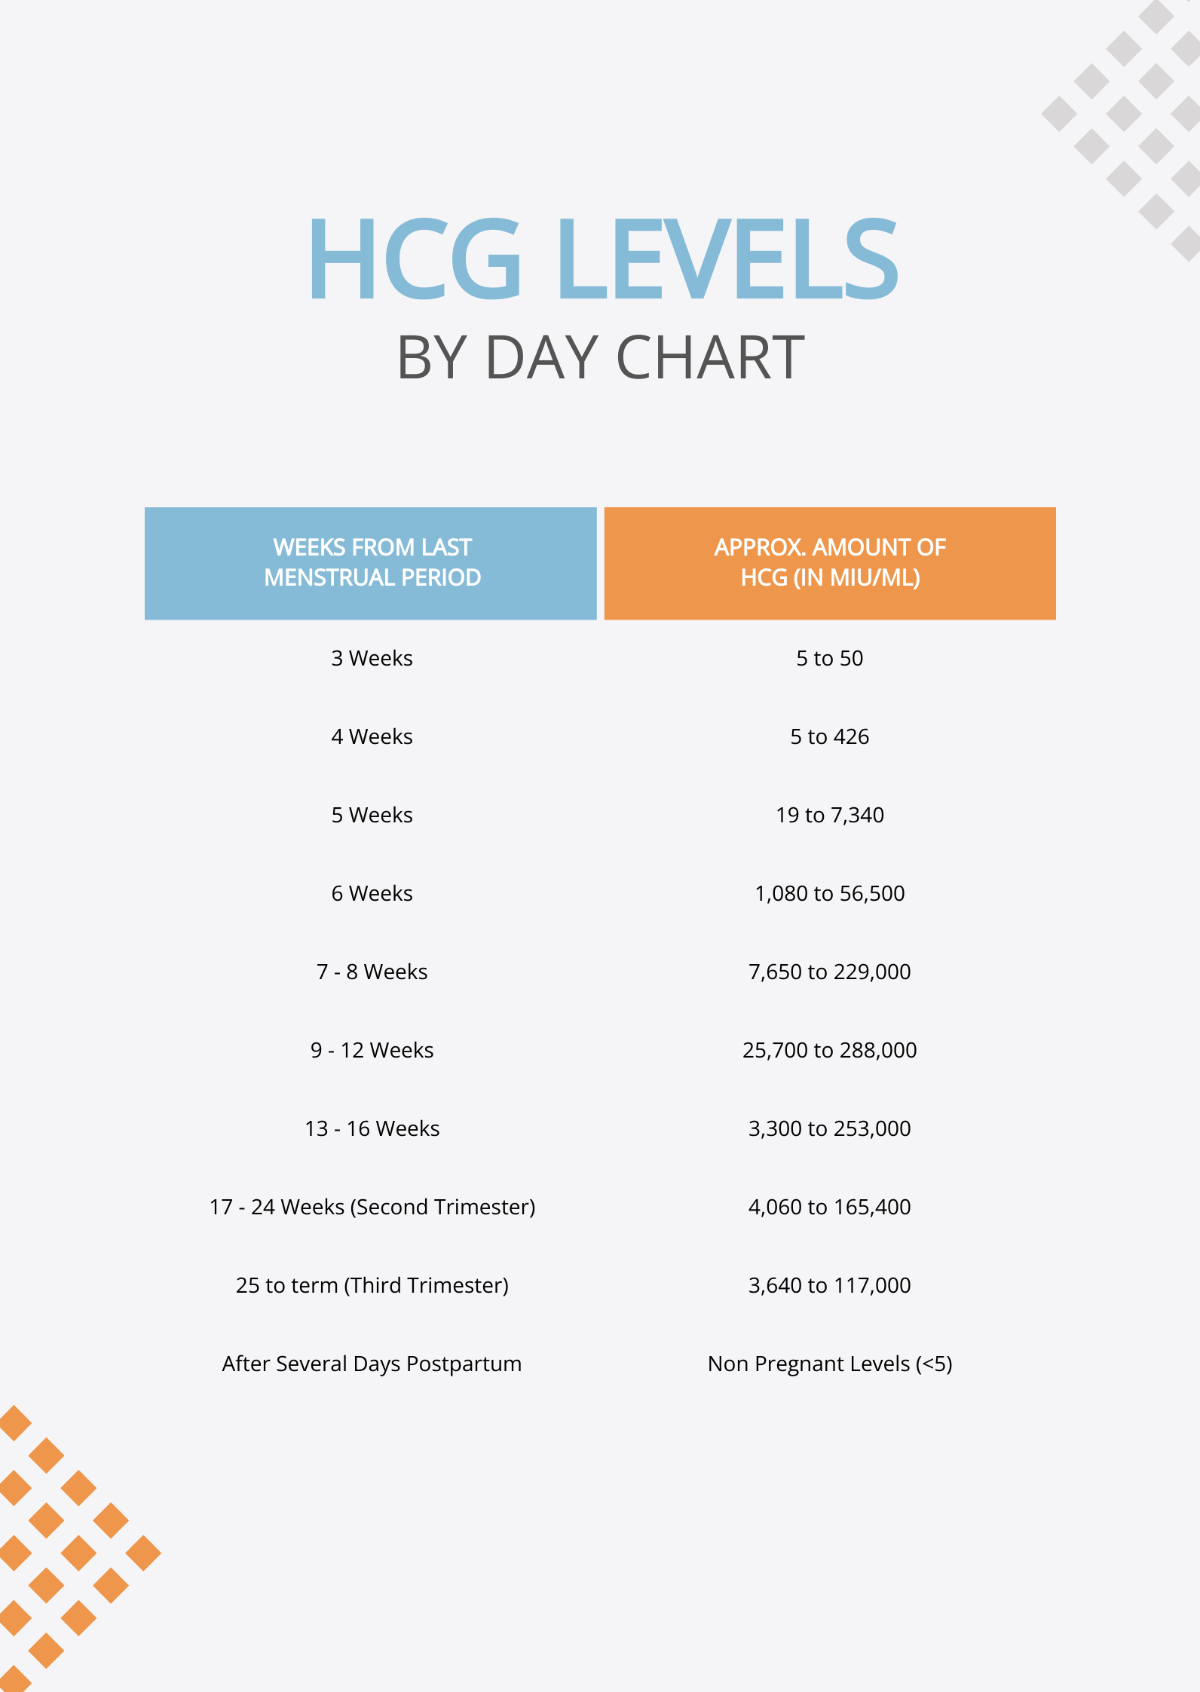 HCG Levels By Day Chart Template